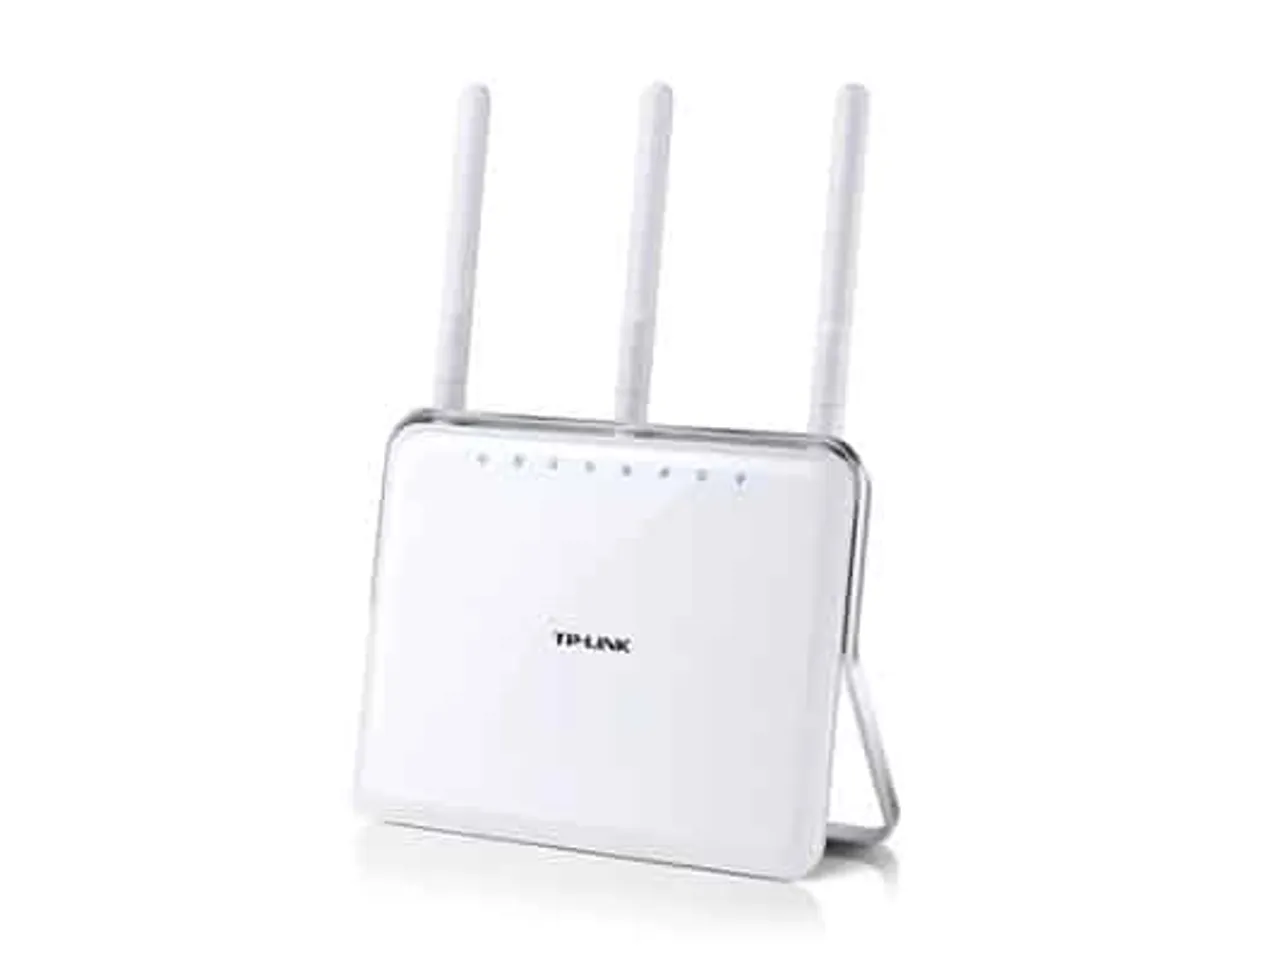 TP-Link Archer D9 Wireless Router Review